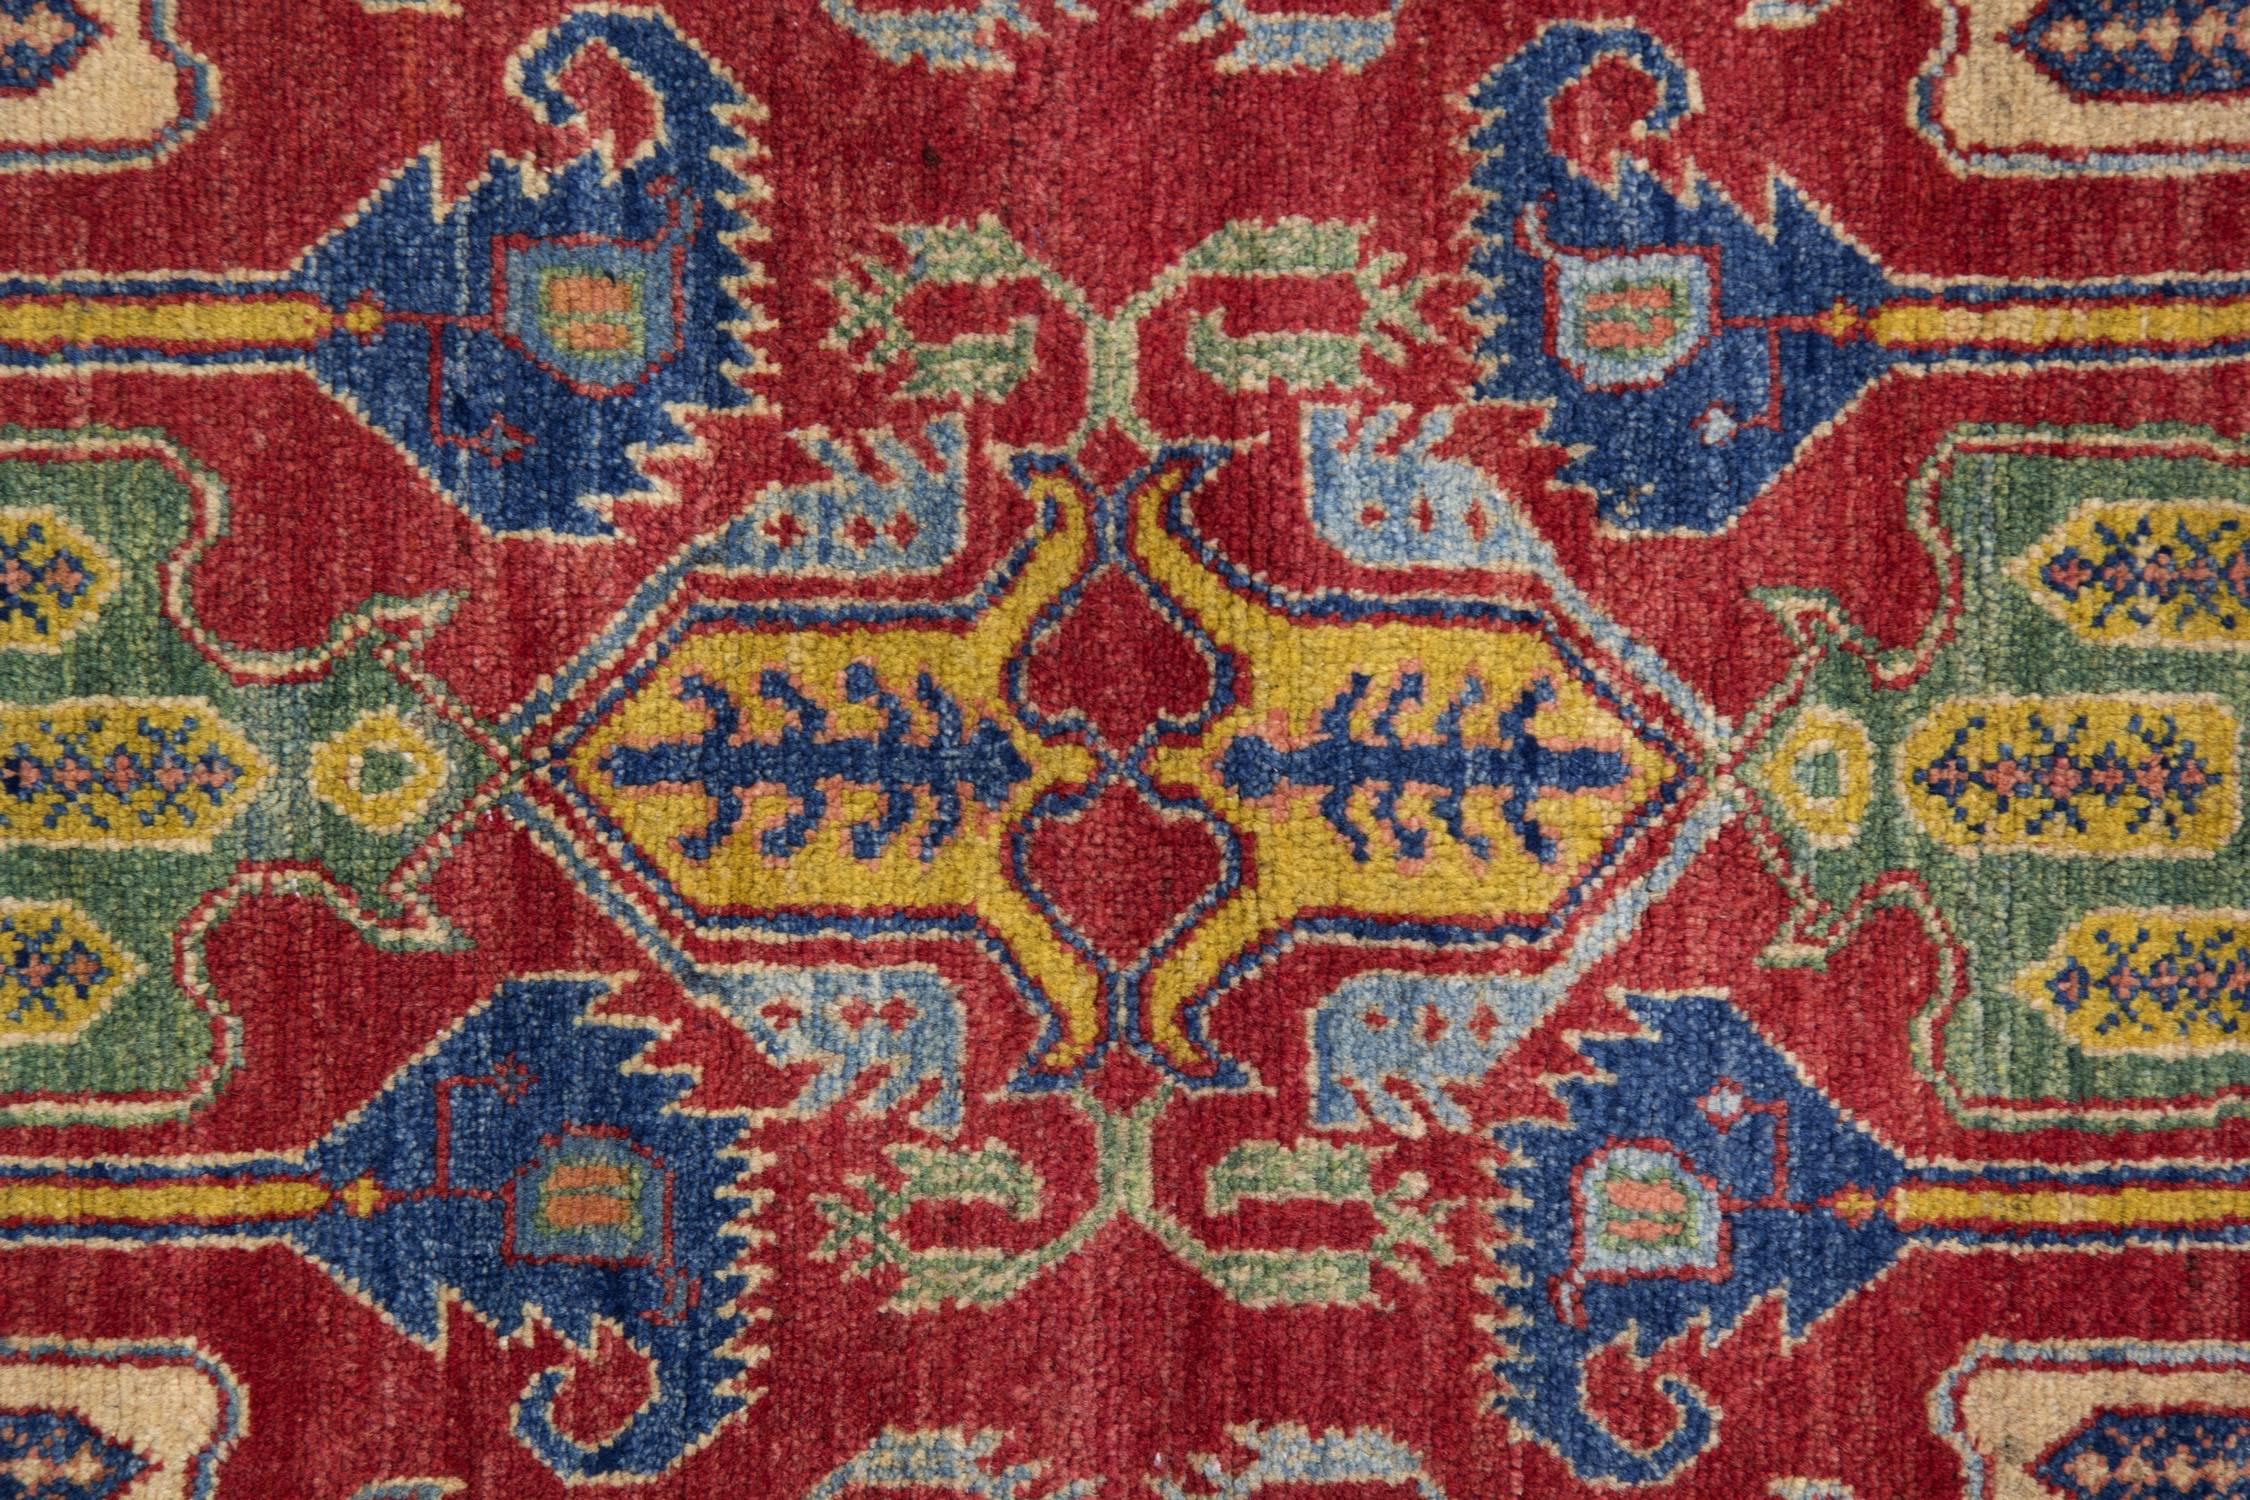 persian style rugs